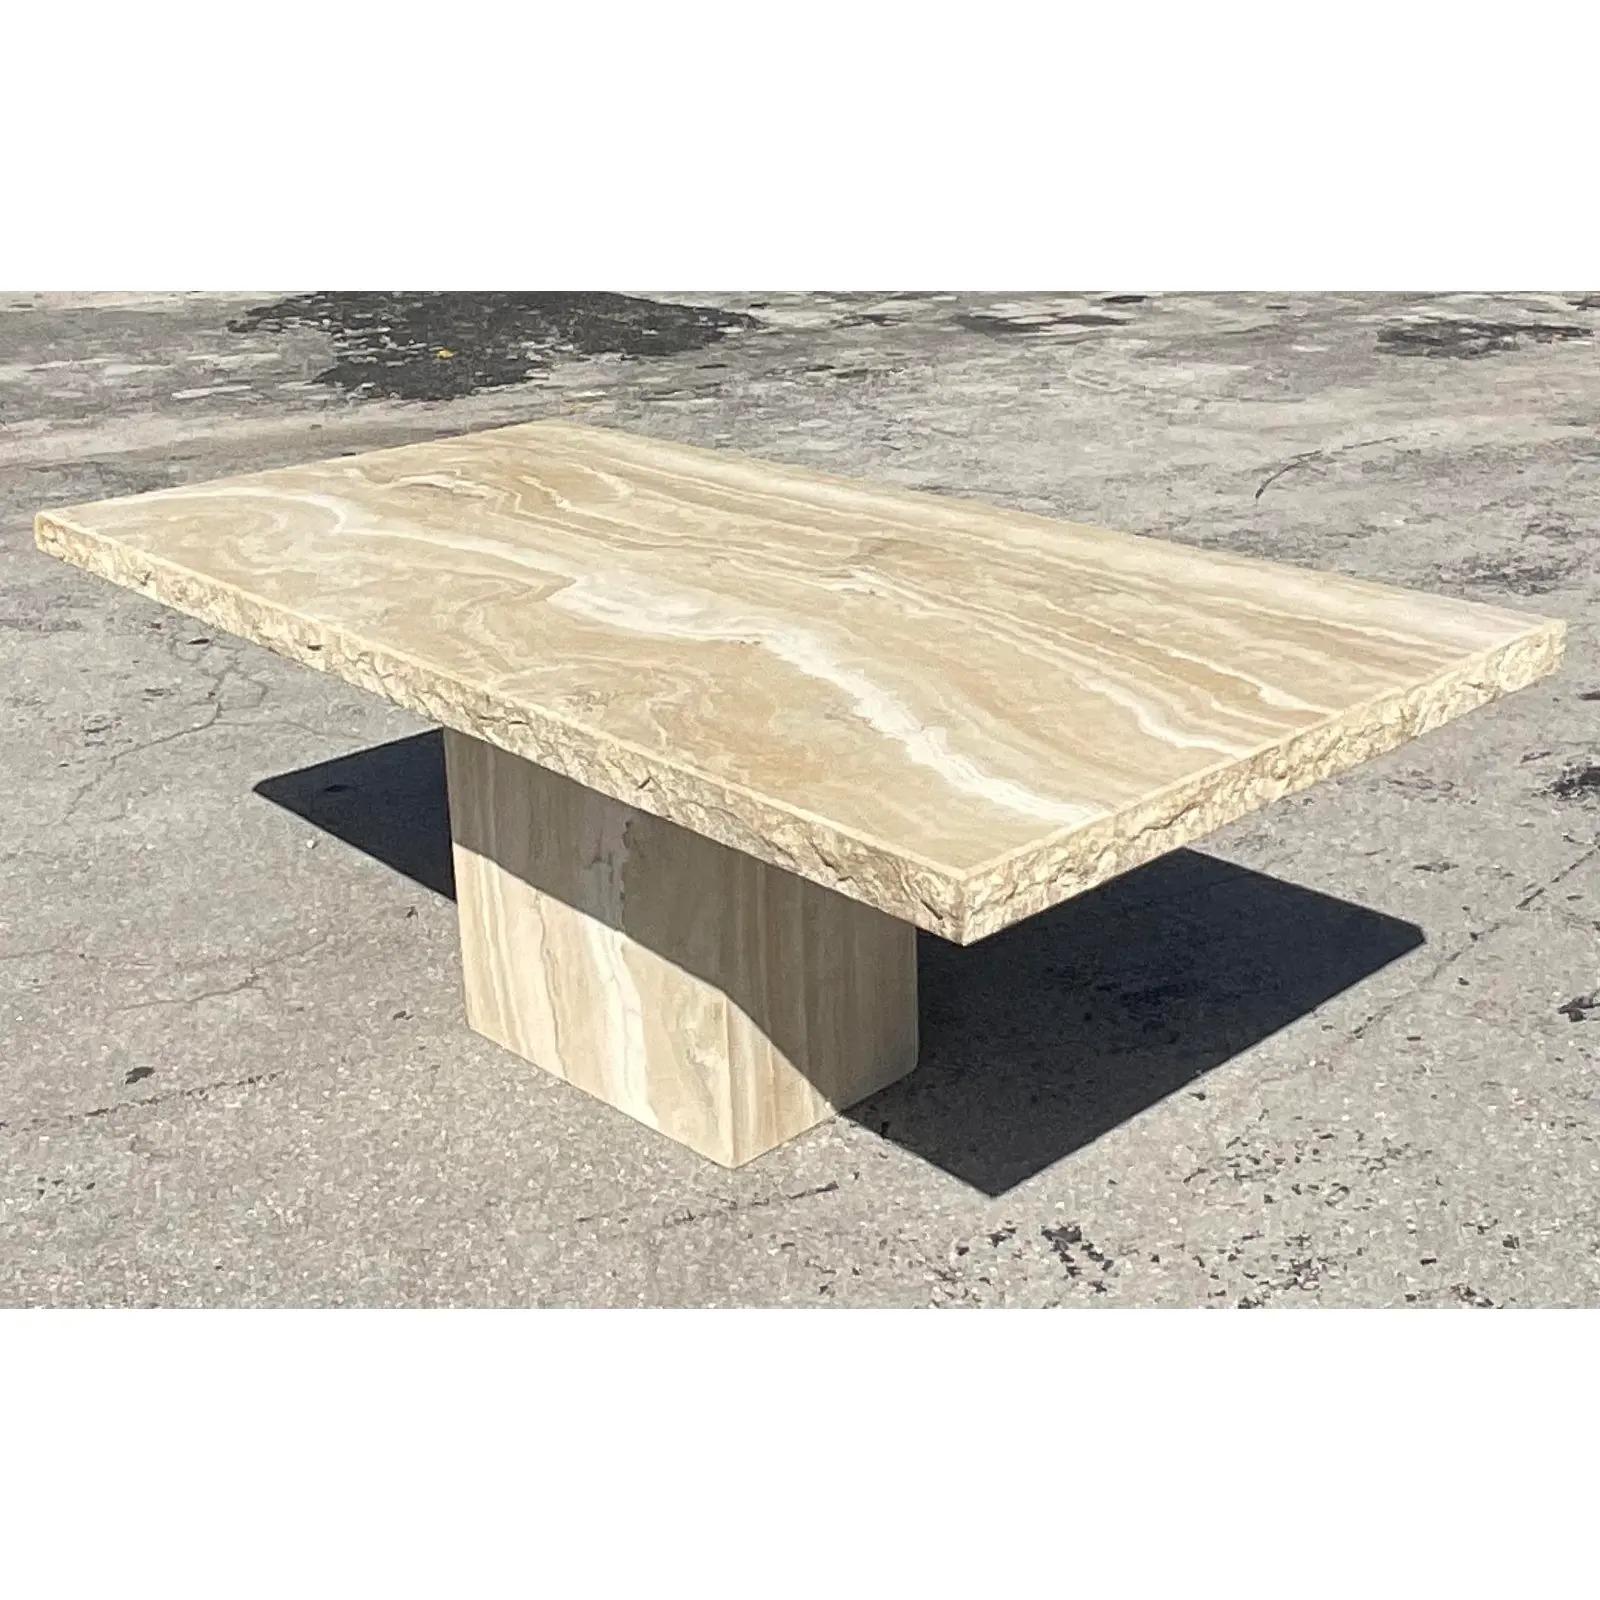 Fantastic vintage Stone International dining table. Jagged edge with amazing natural grain in the stone. Acquired from a Miami estate.